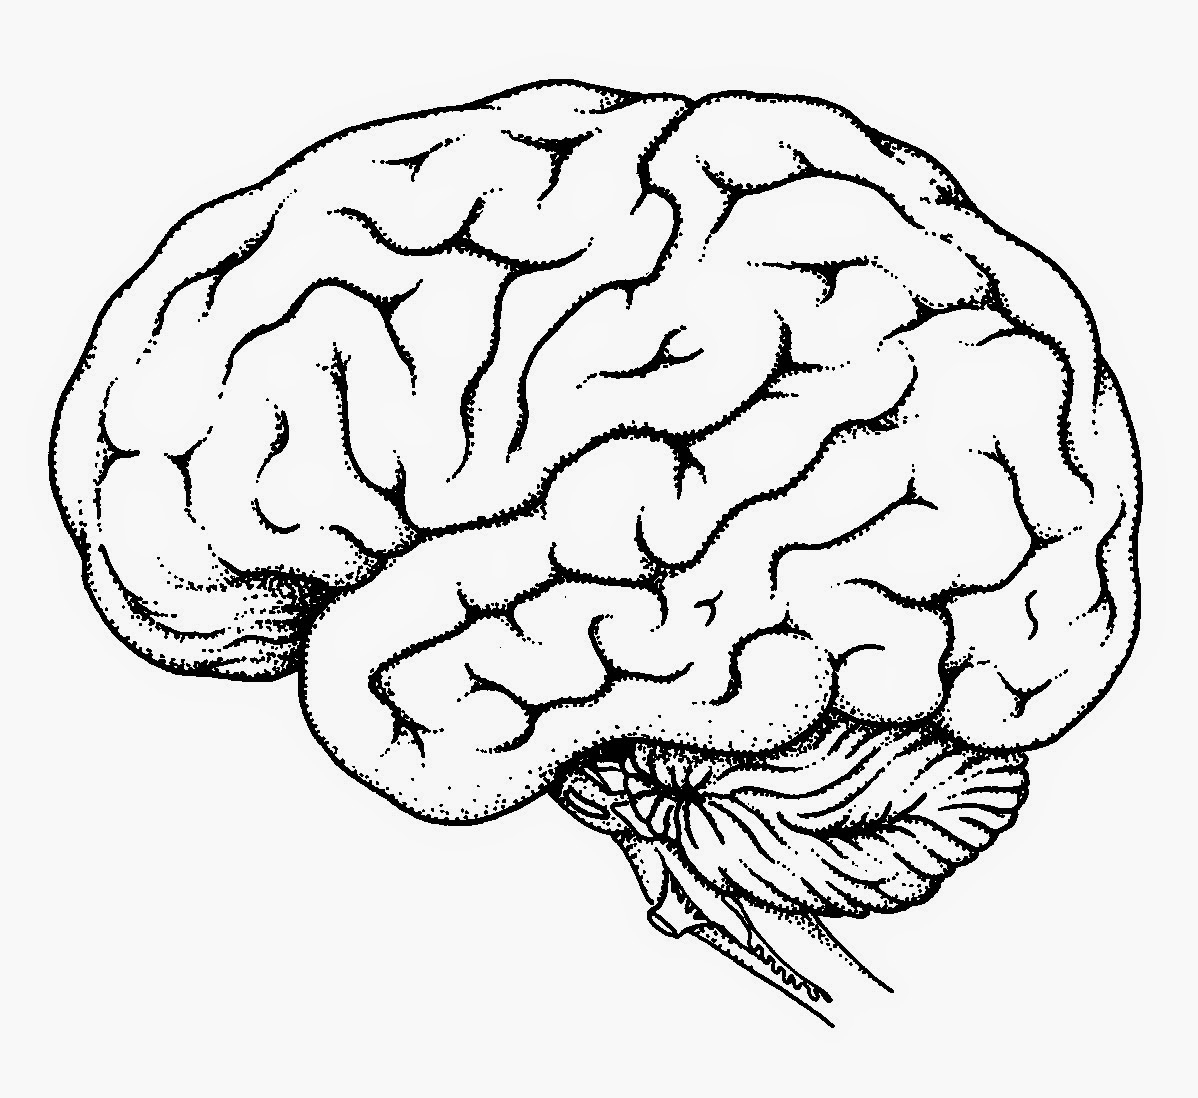 Drawing Of The Brain With Labels at GetDrawings.com | Free ...